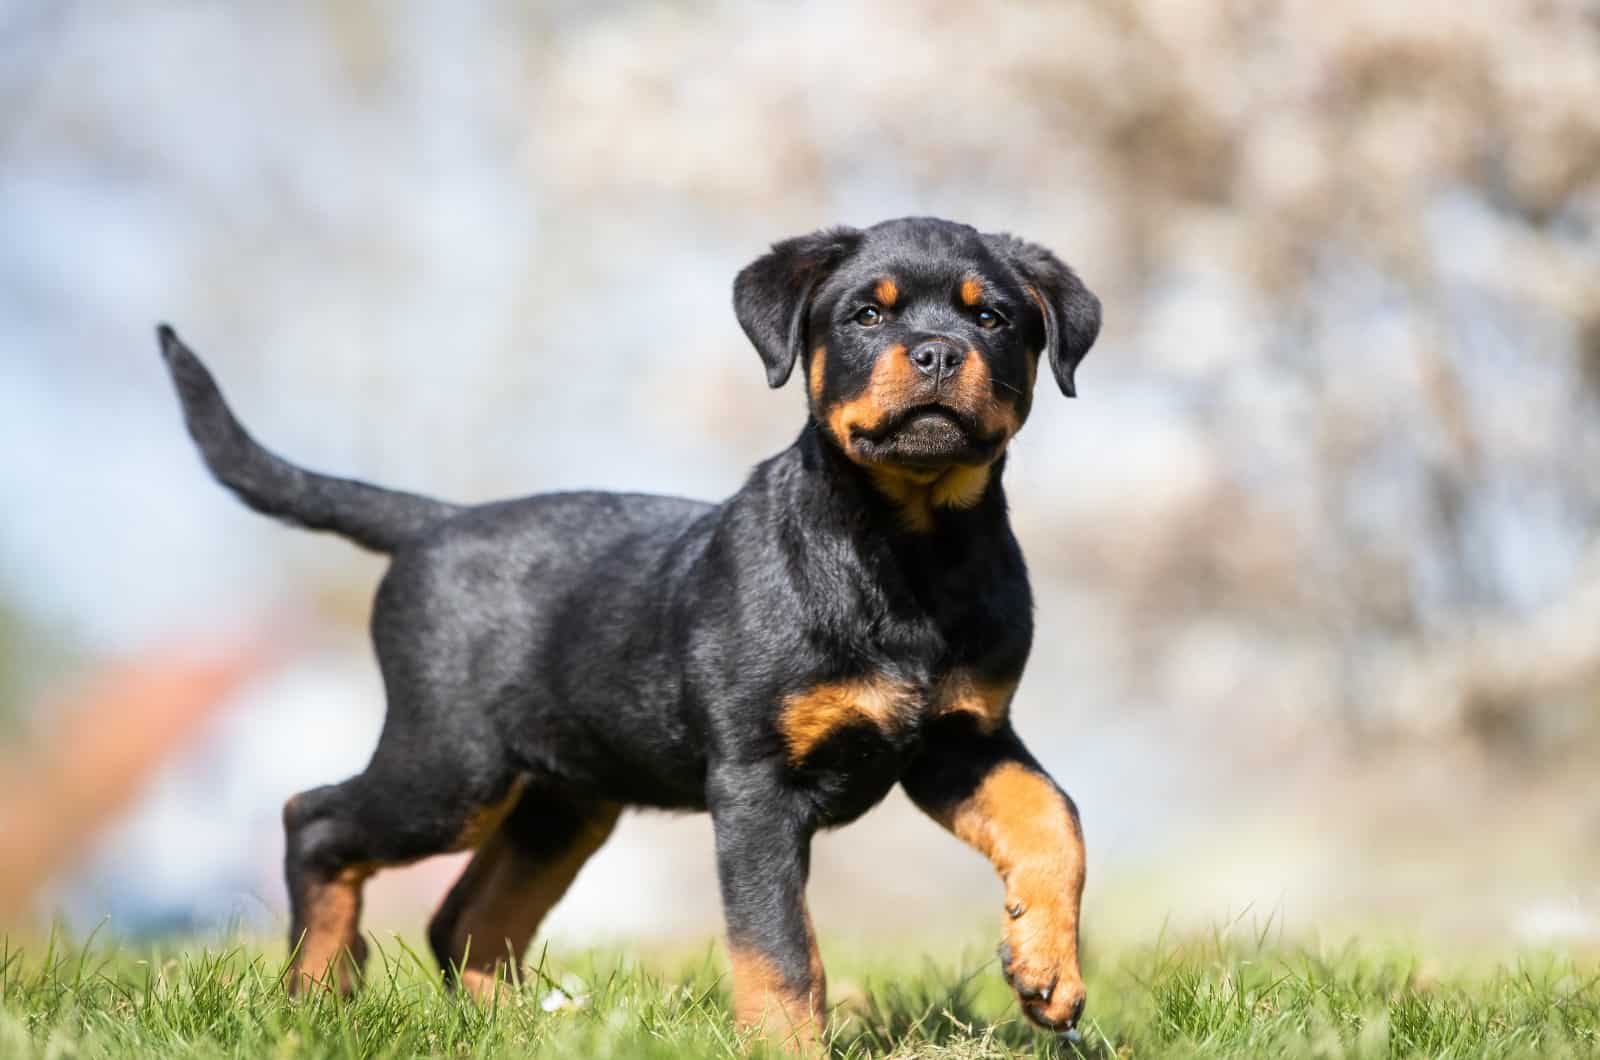 How To Potty Train A Rottweiler Puppy – 7 Great Tips